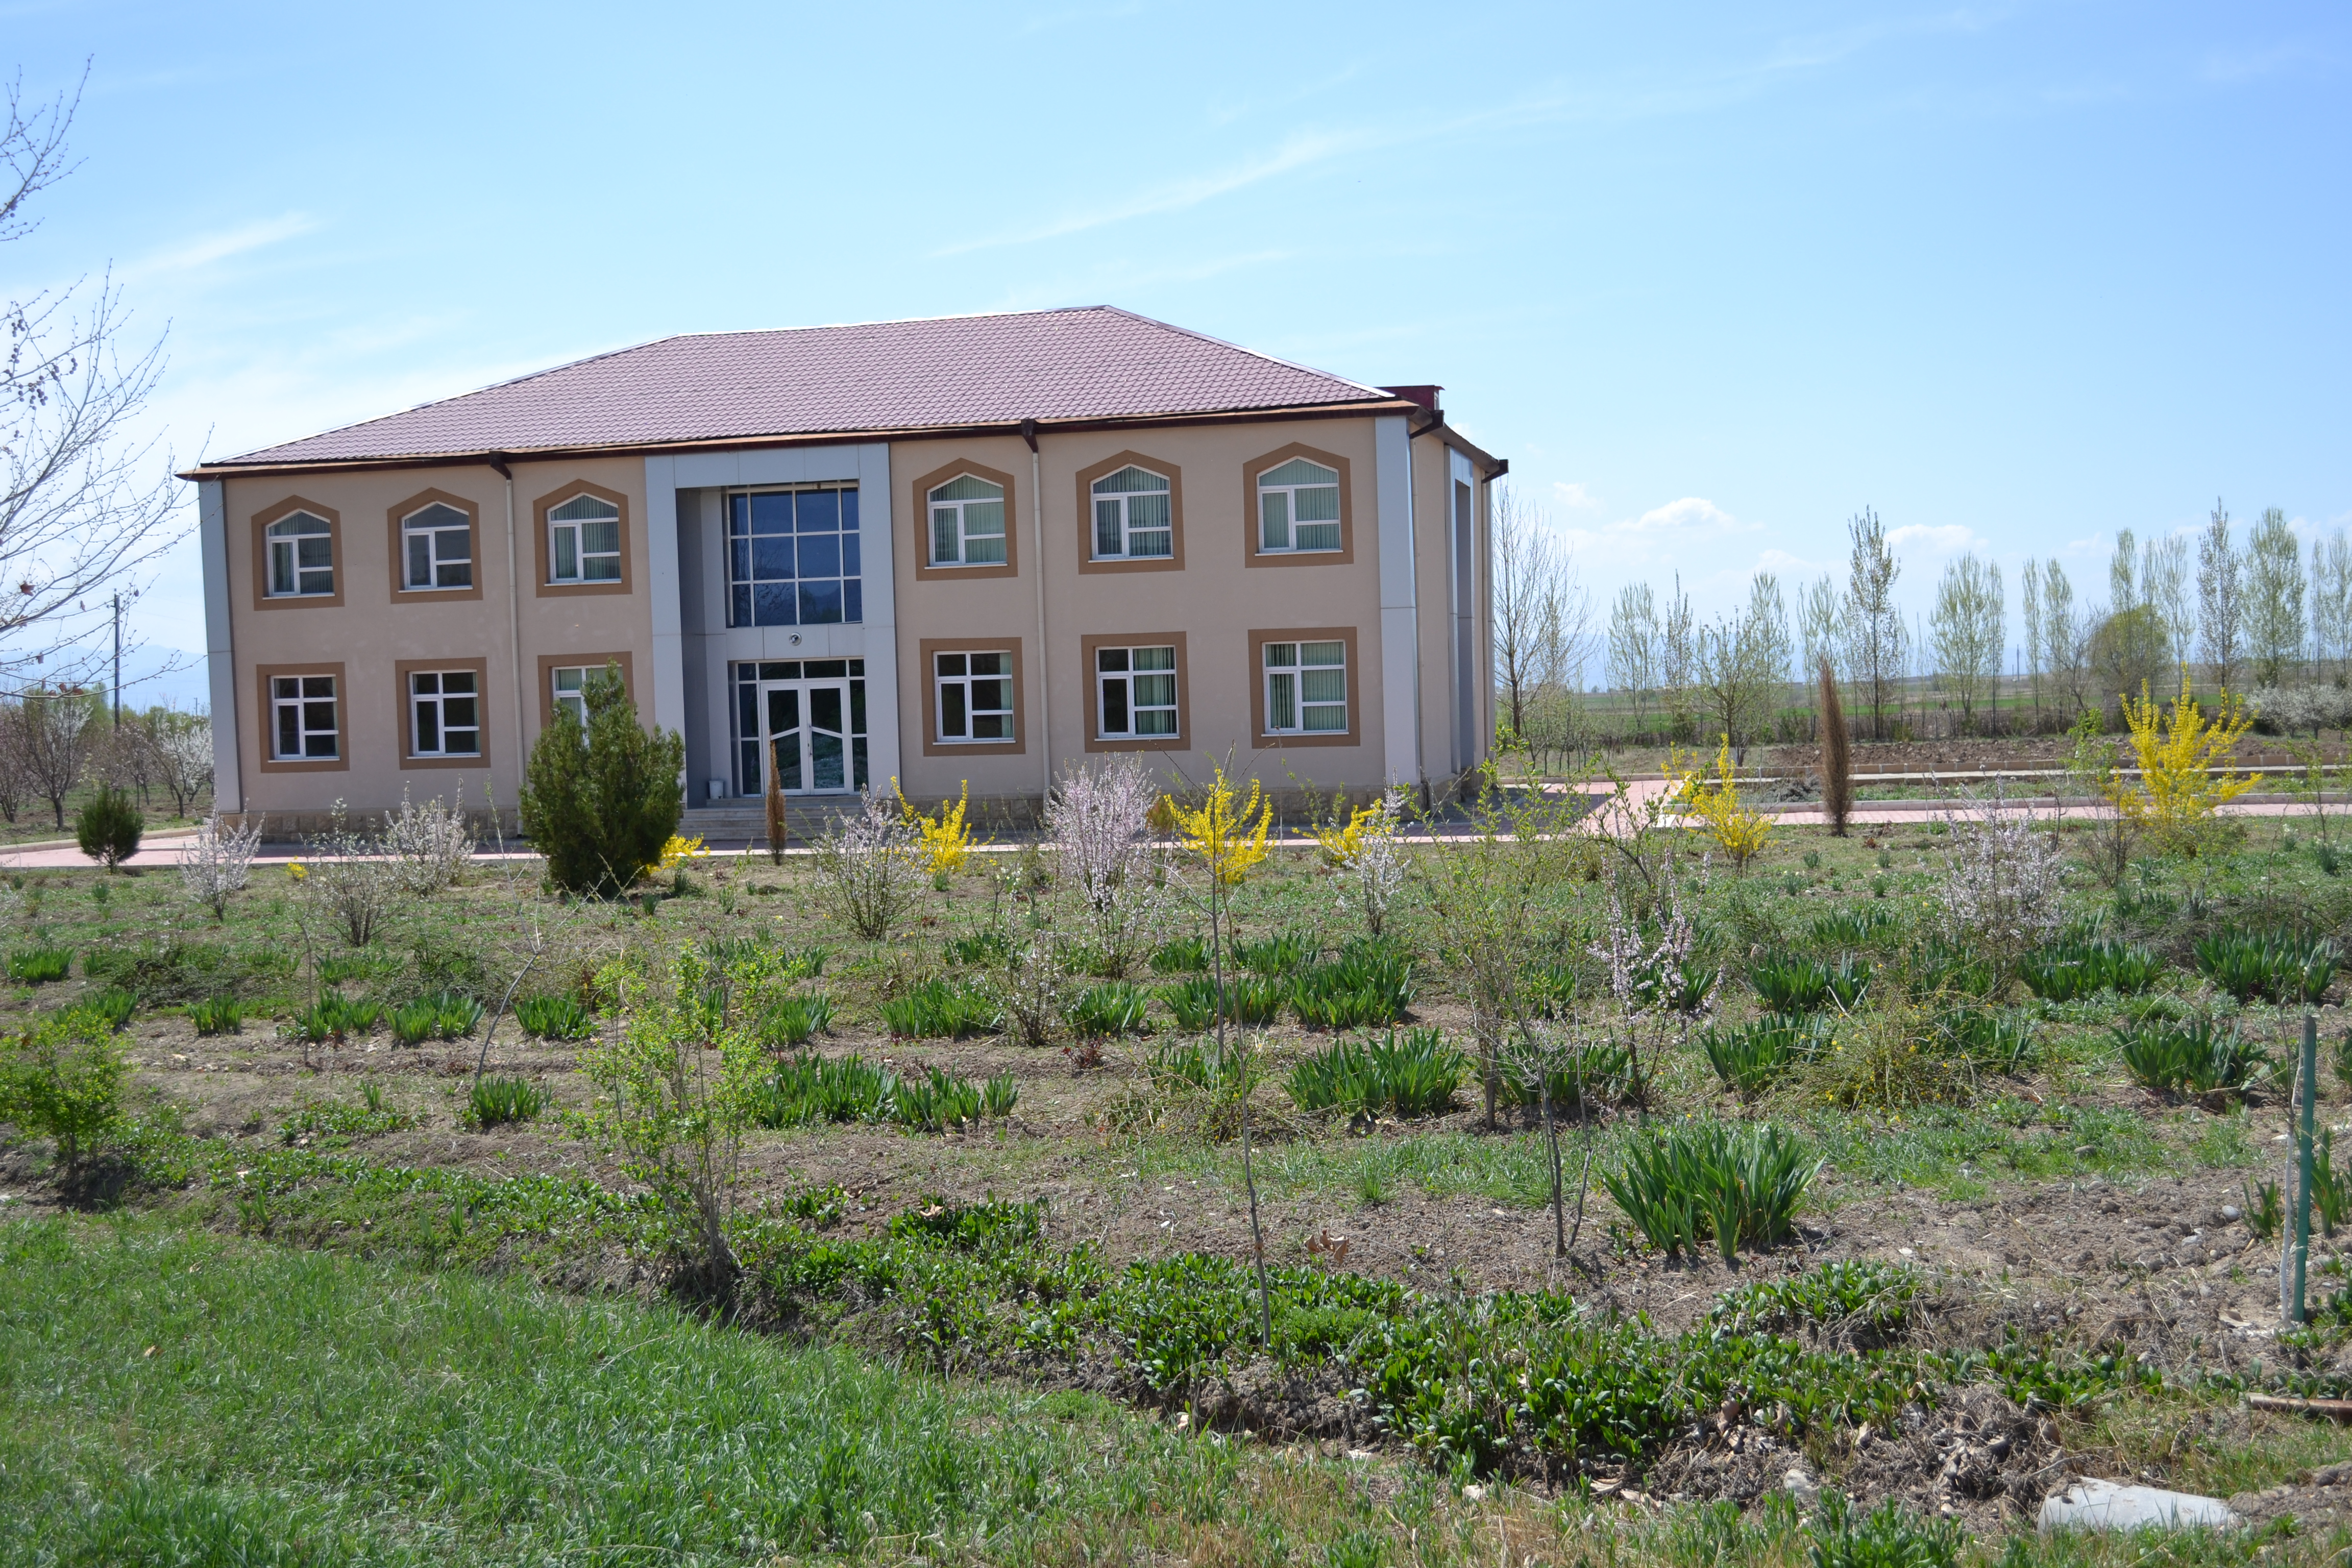 Botanical garden of Nakhchivan Branch planted new trees and decorative flower bushes